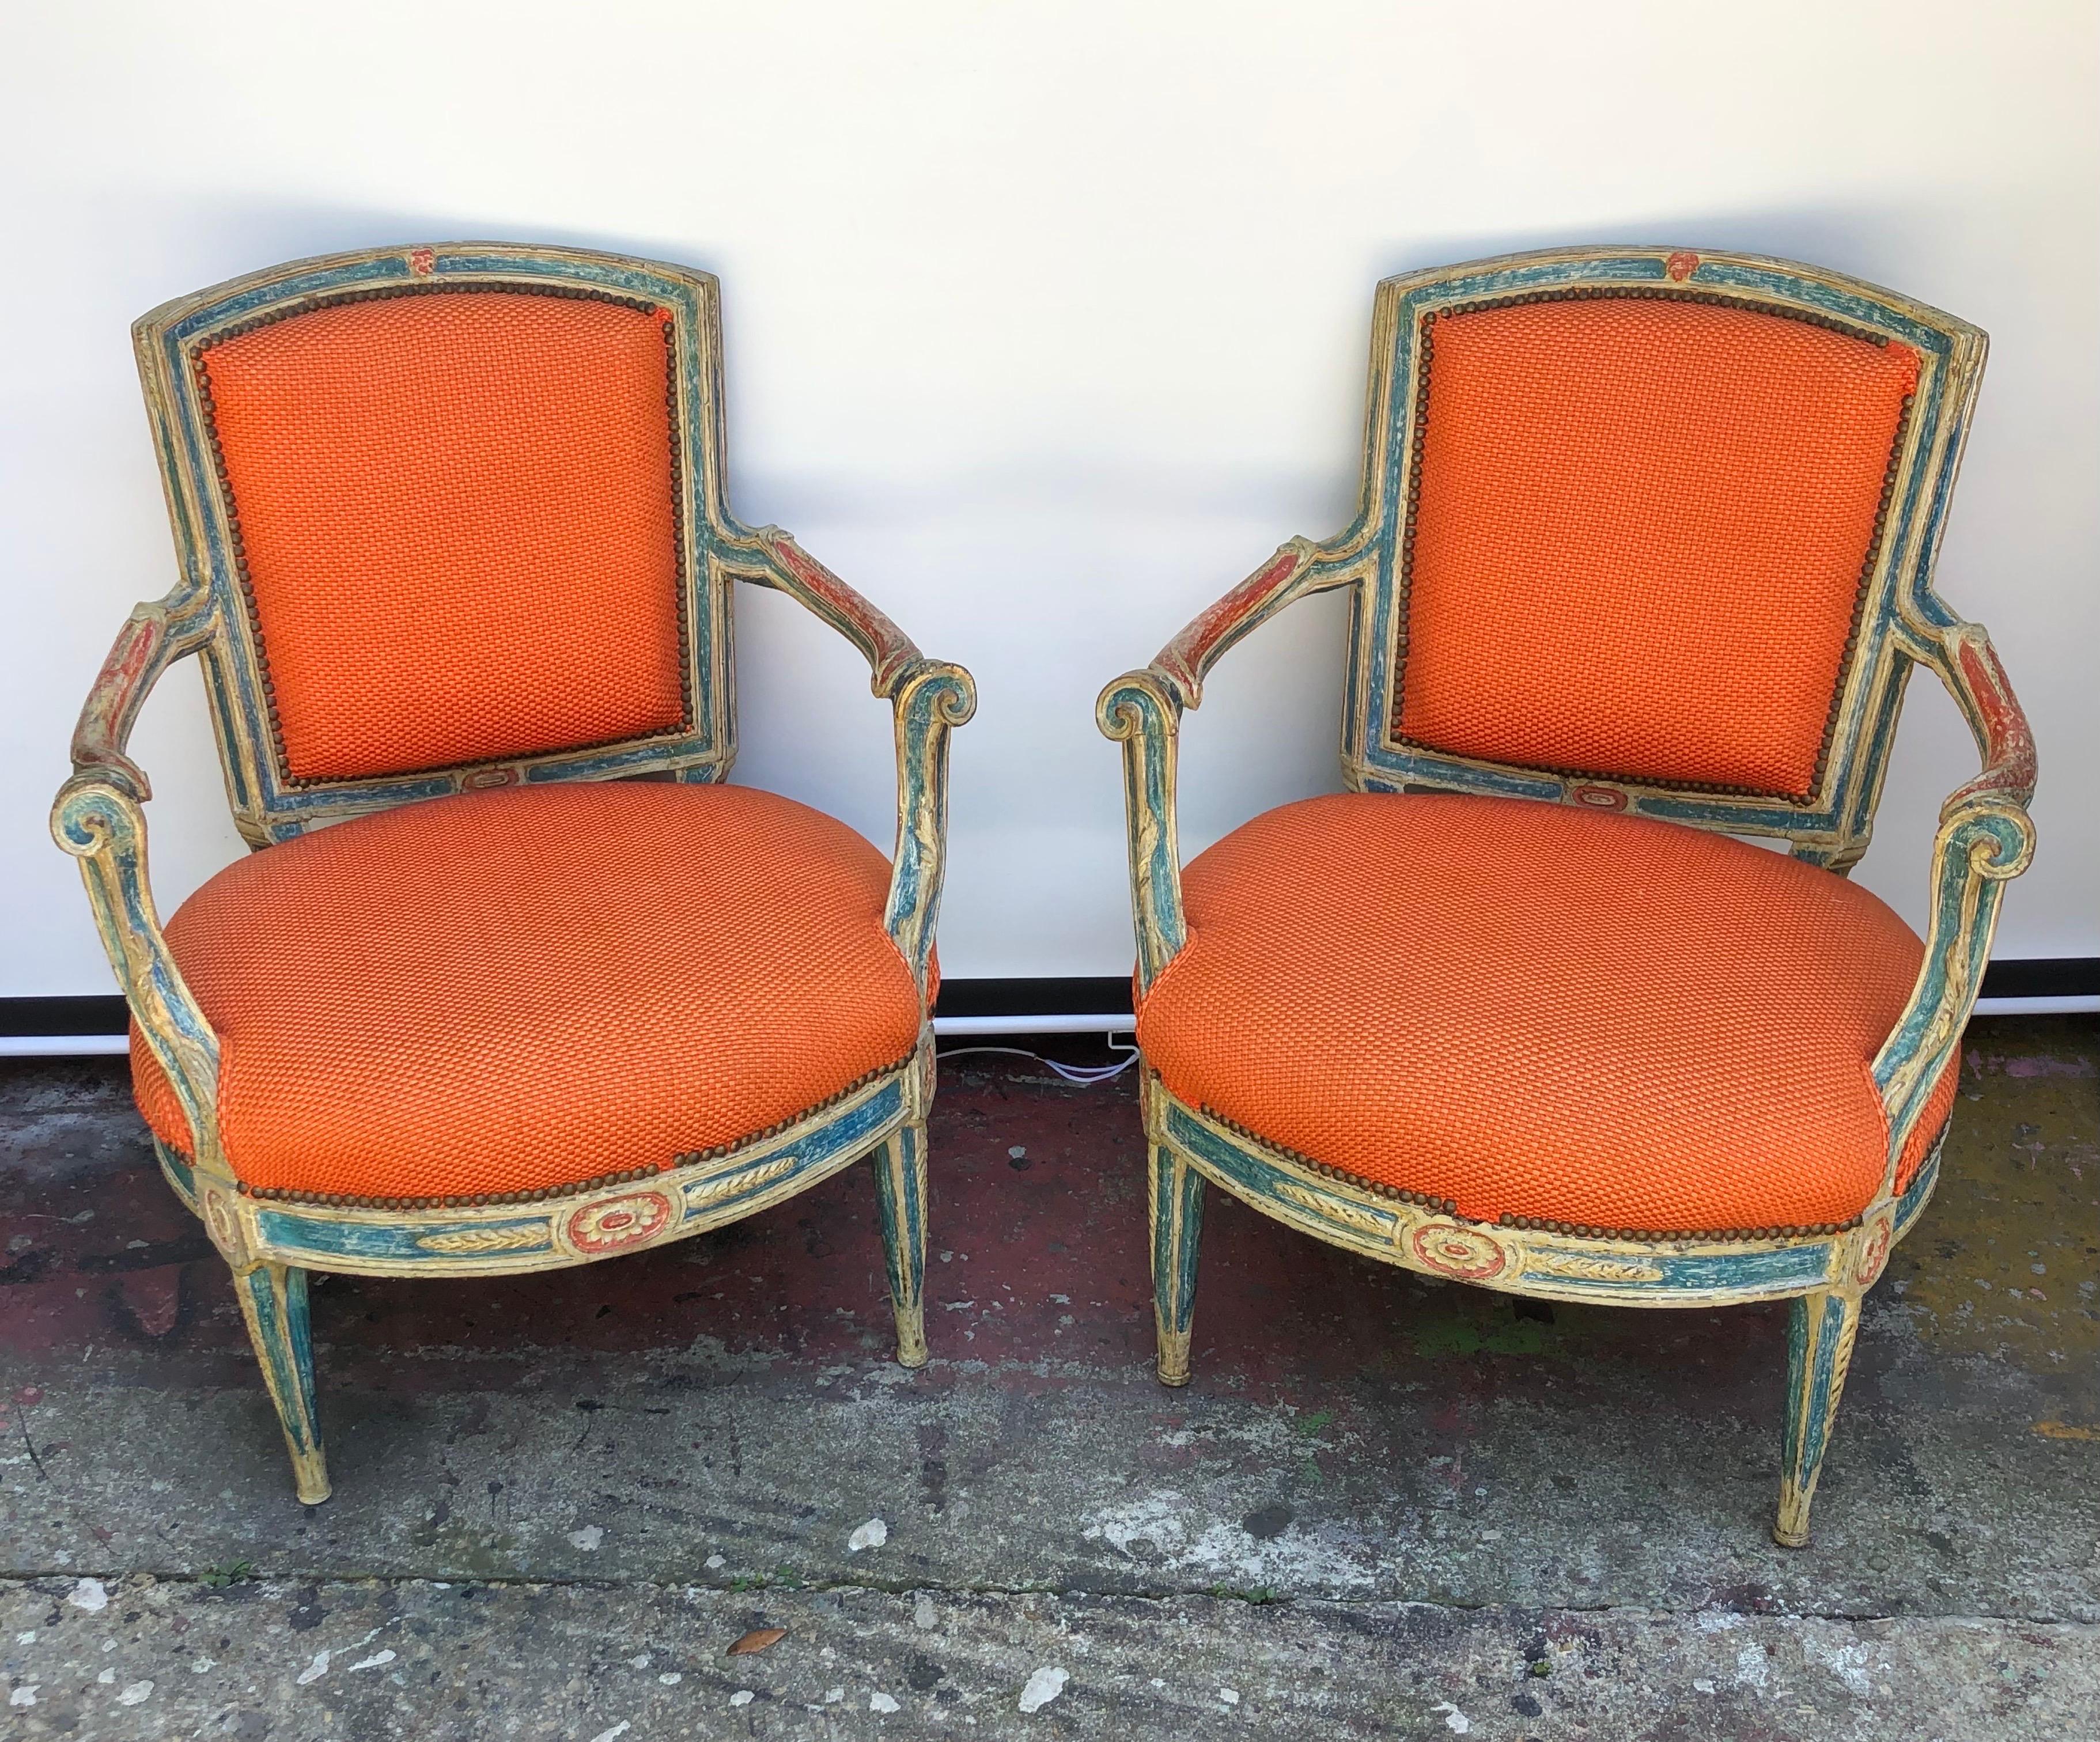 Hand-Painted 18th C. Pair of Italian Neoclassical Paint Decorated Armchairs For Sale